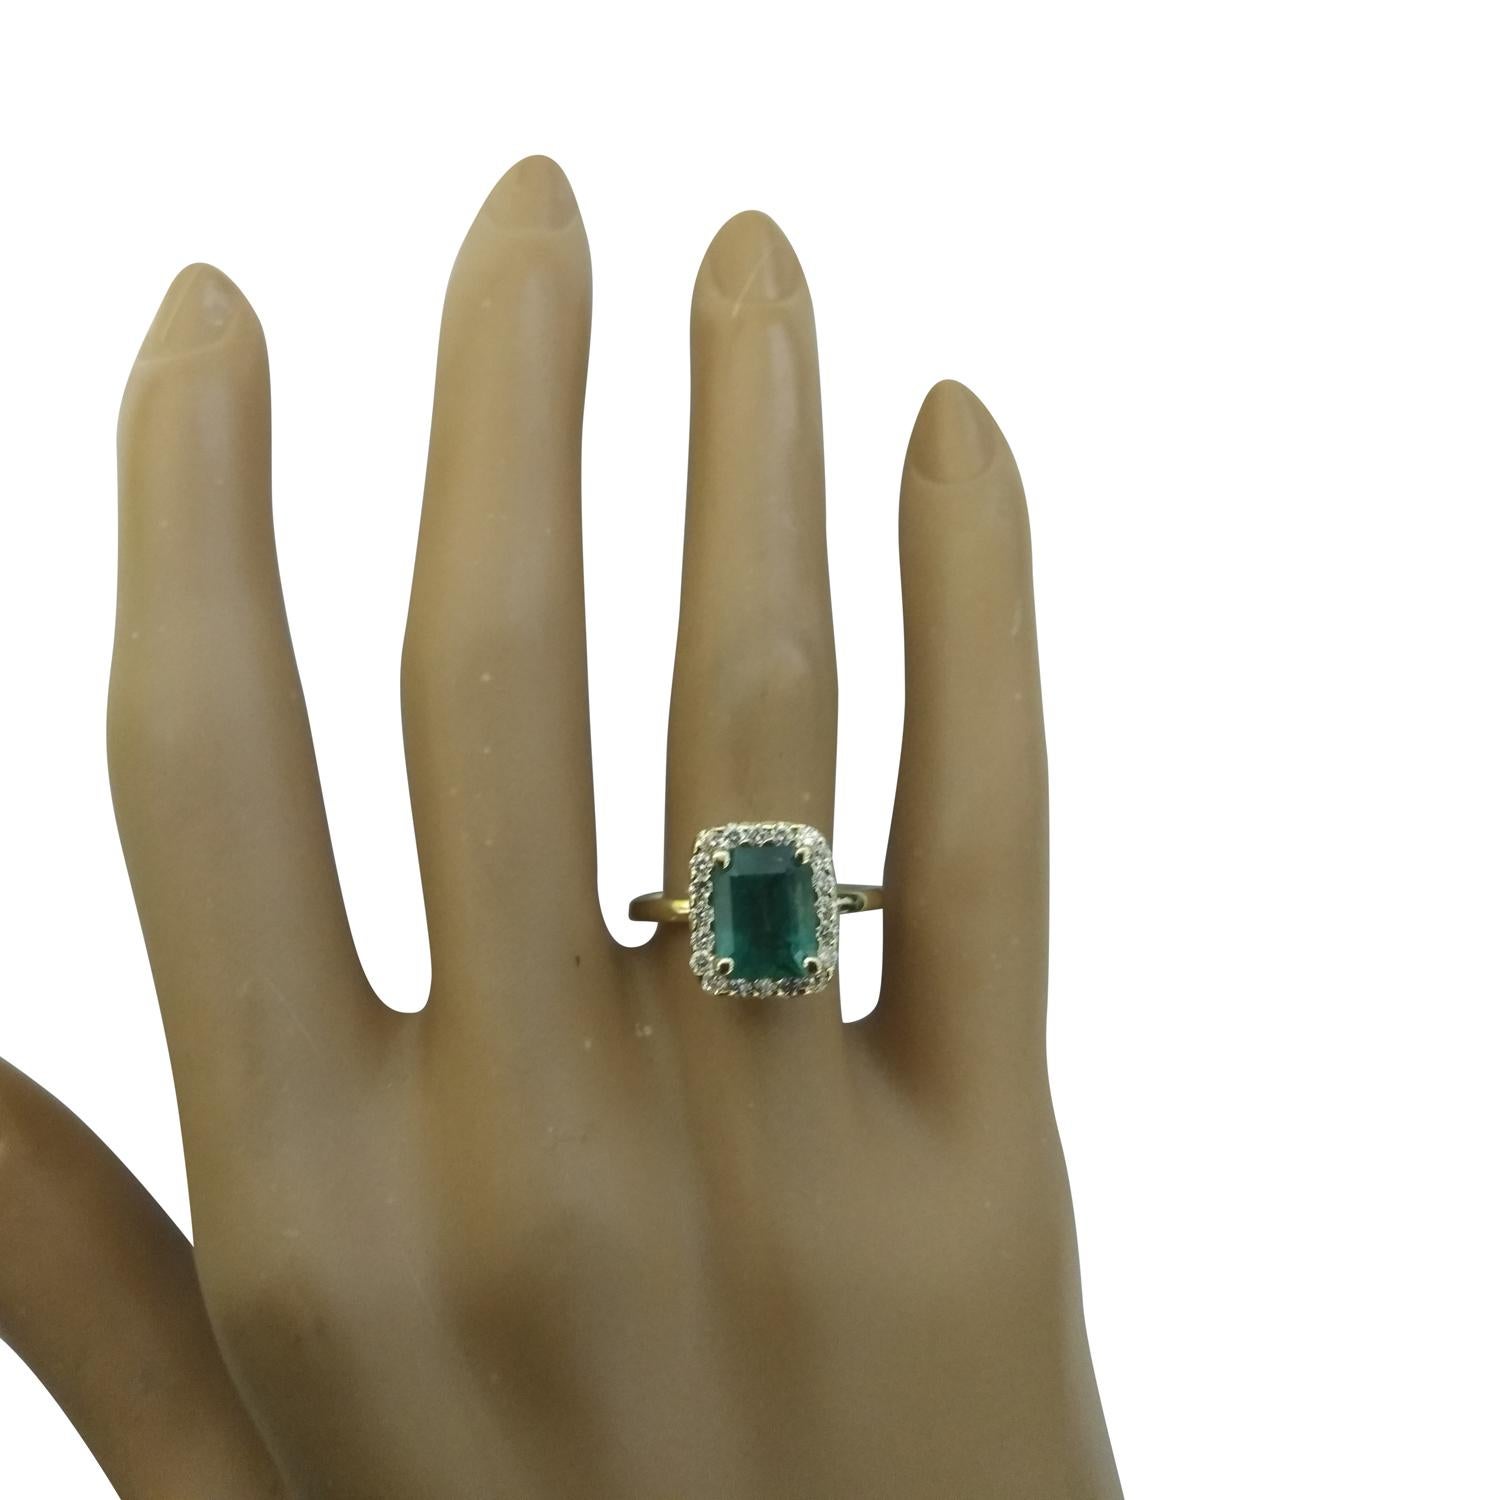 2.47 Carat Natural Emerald 14 Karat Solid Yellow Gold Diamond Ring
Stamped: 14K 
Ring Size 7
Total Ring Weight: 2.9 Grams 
Emerald Weight 2.07 Carat (8.50x6.50 Millimeters)
Natural Emerald Treatment: Oil Only
Diamond Weight: 0.40 Carat (F-G Color,